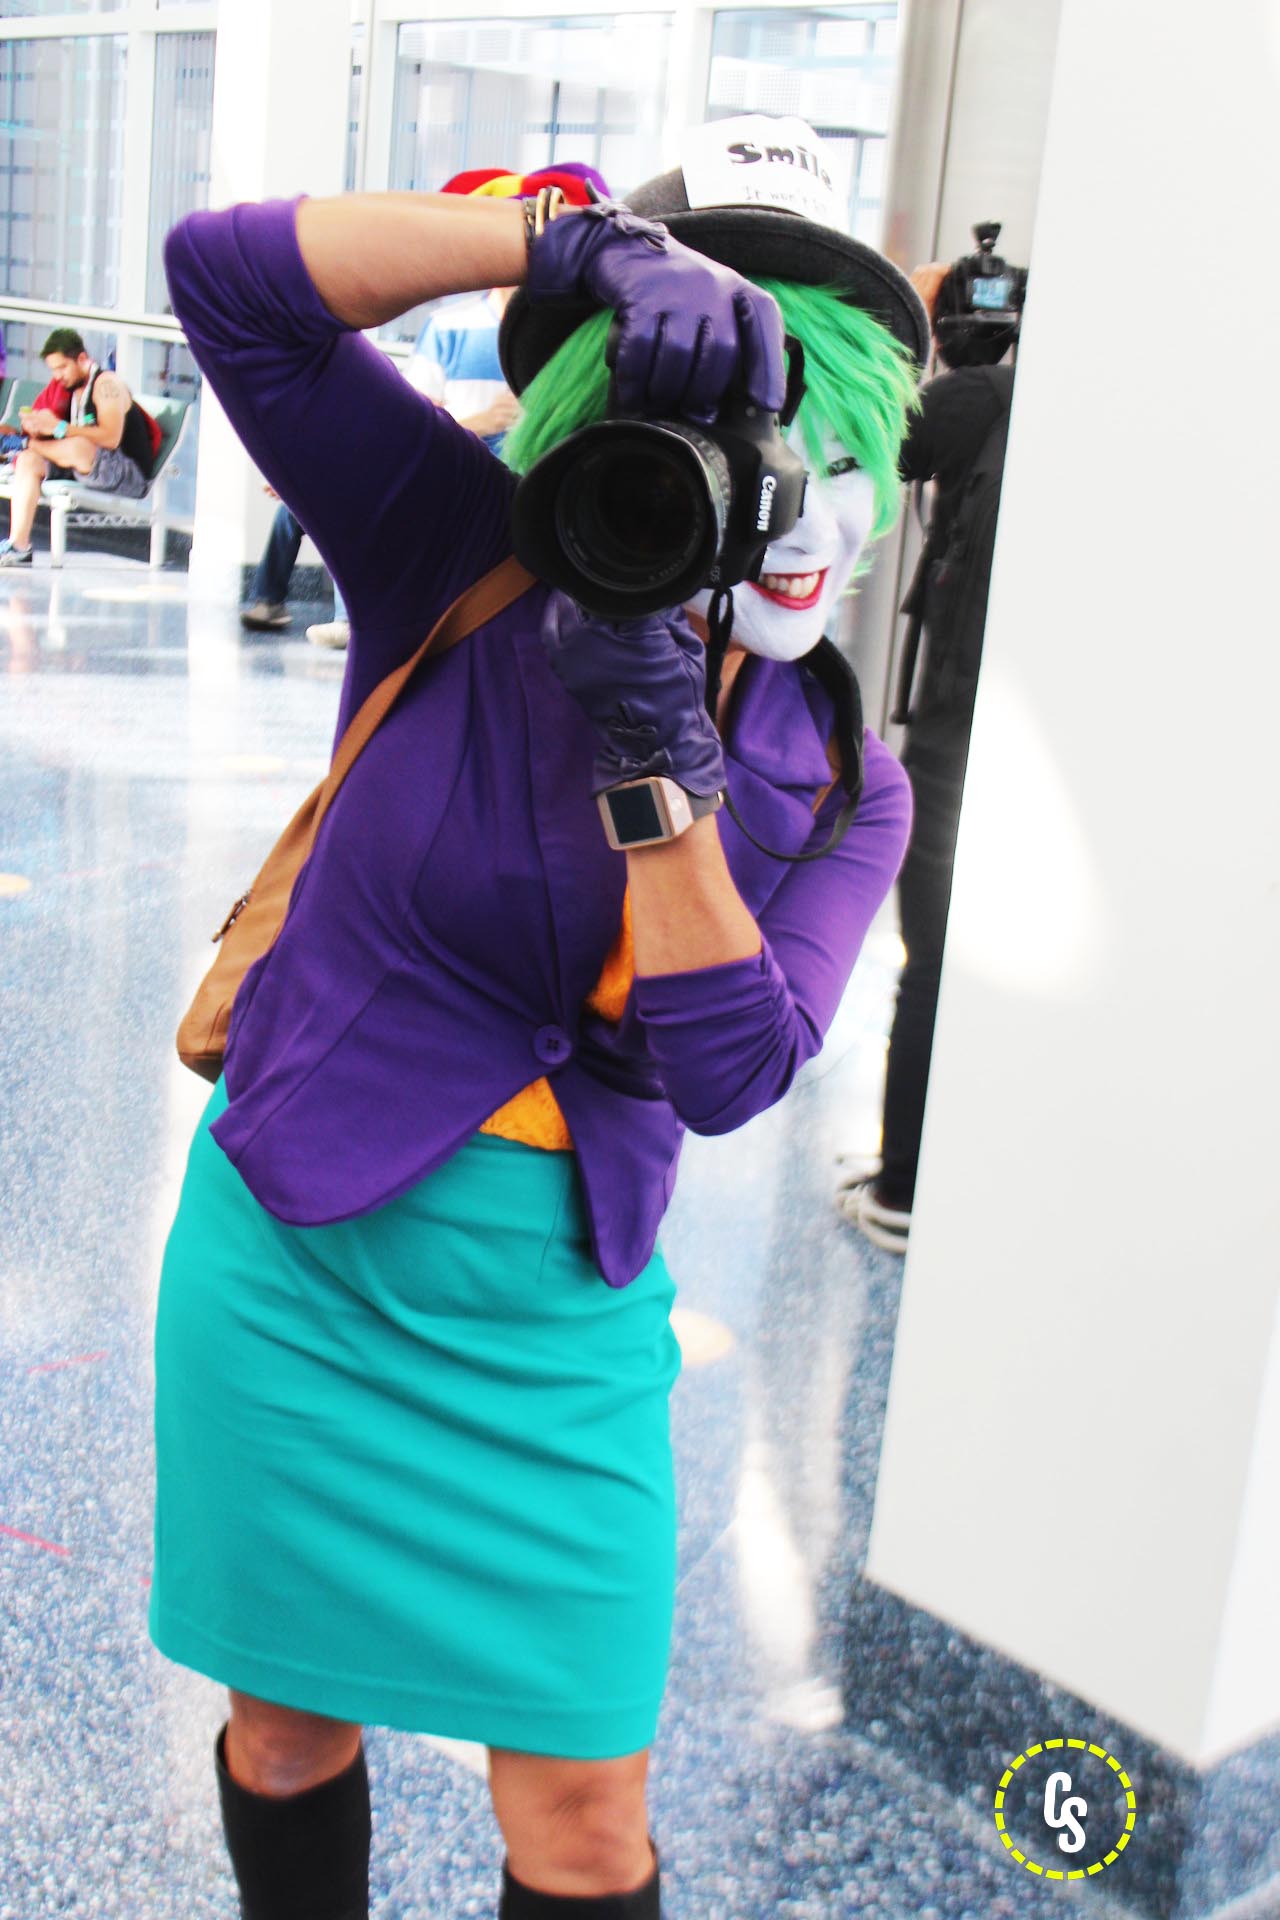 Comikaze Expo 2015: Check out the First Round of Cosplay